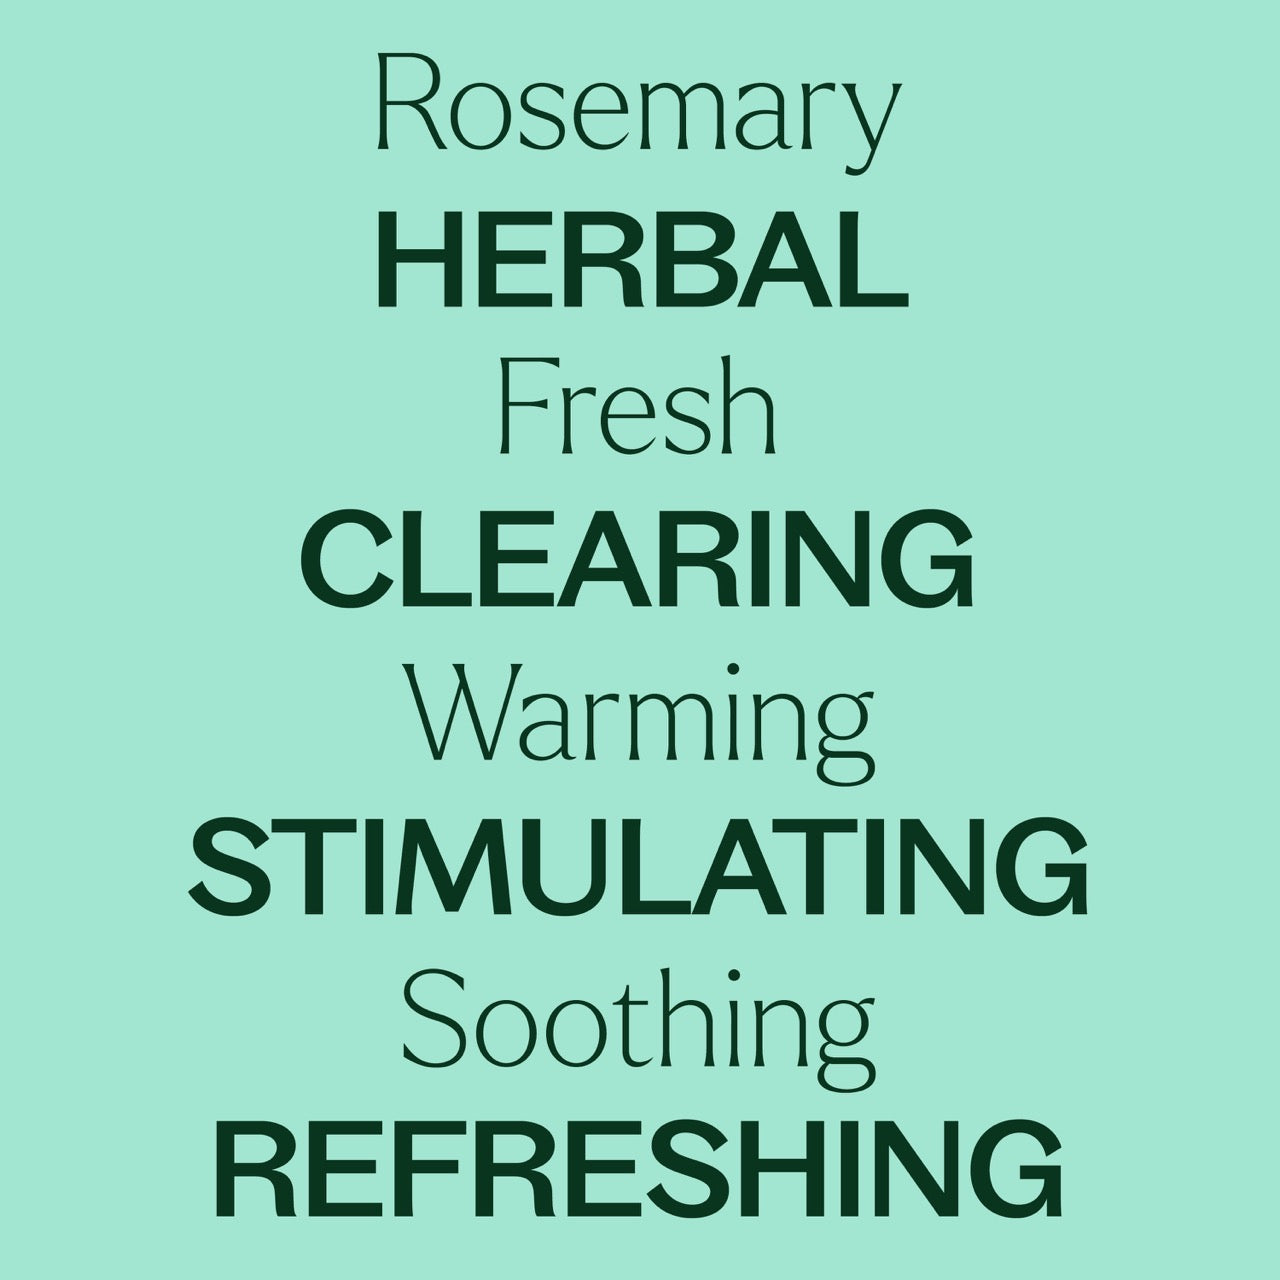 Rosemary 1,8-Cineole Essential Oil is herbal, fresh, clearing, warming, stimulating, soothing, and refreshing